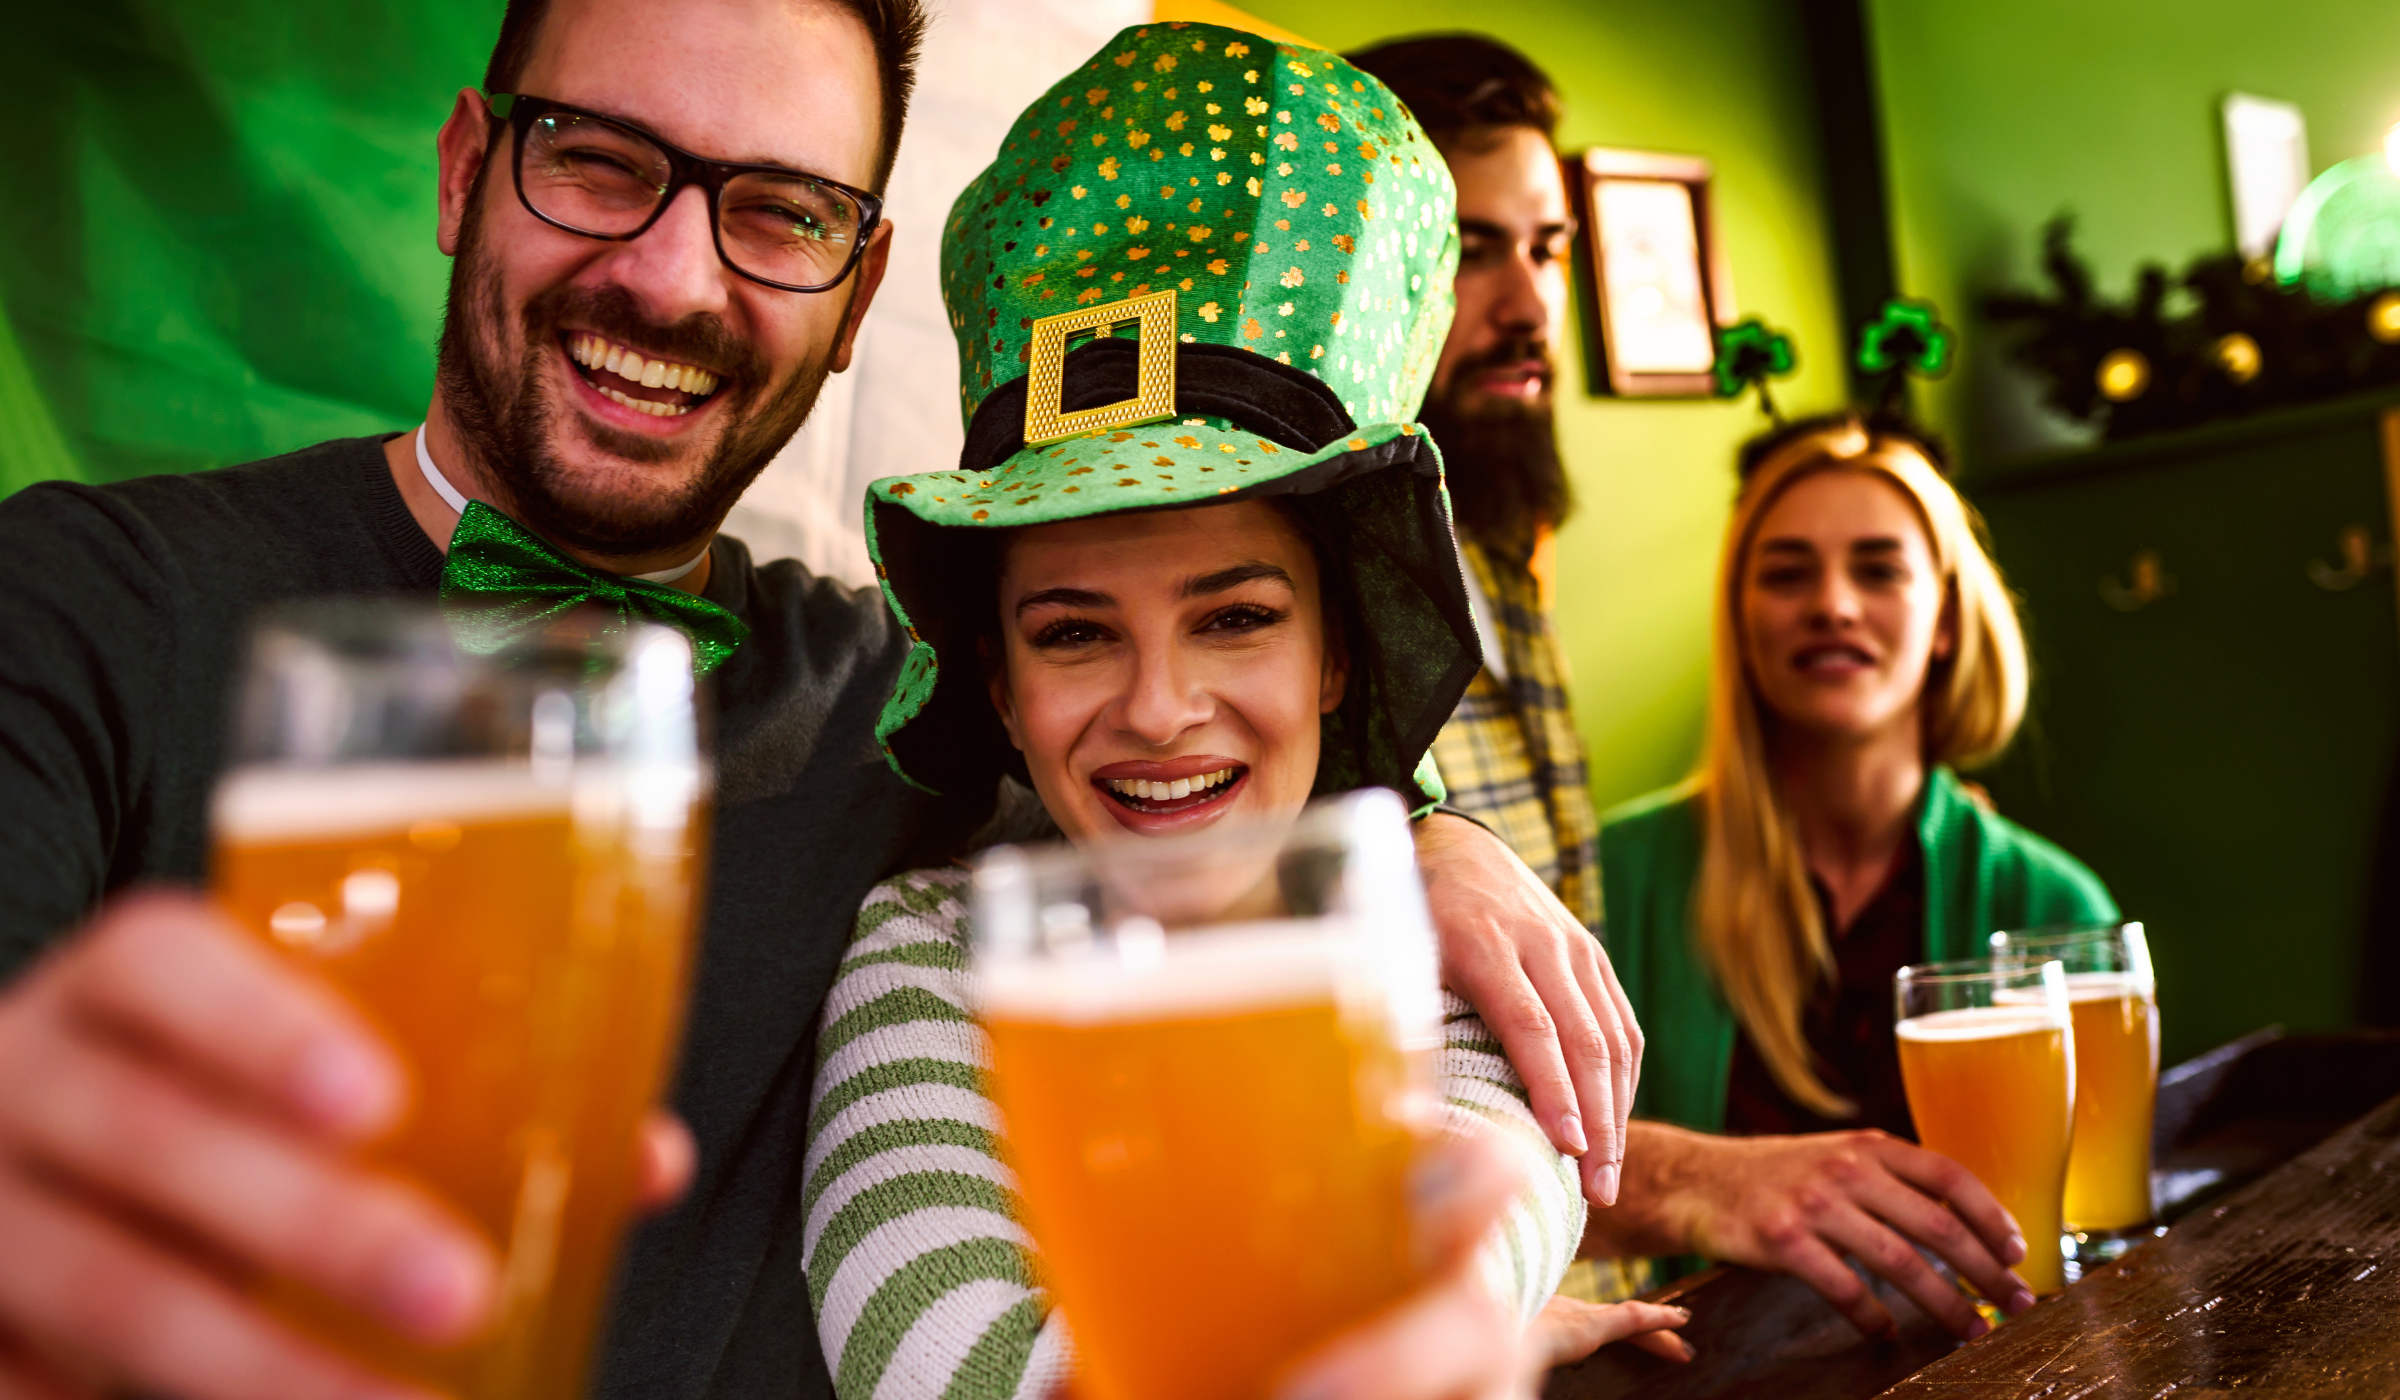 St Patrick's Day: 12 Great Ideas to Promote Teamwork